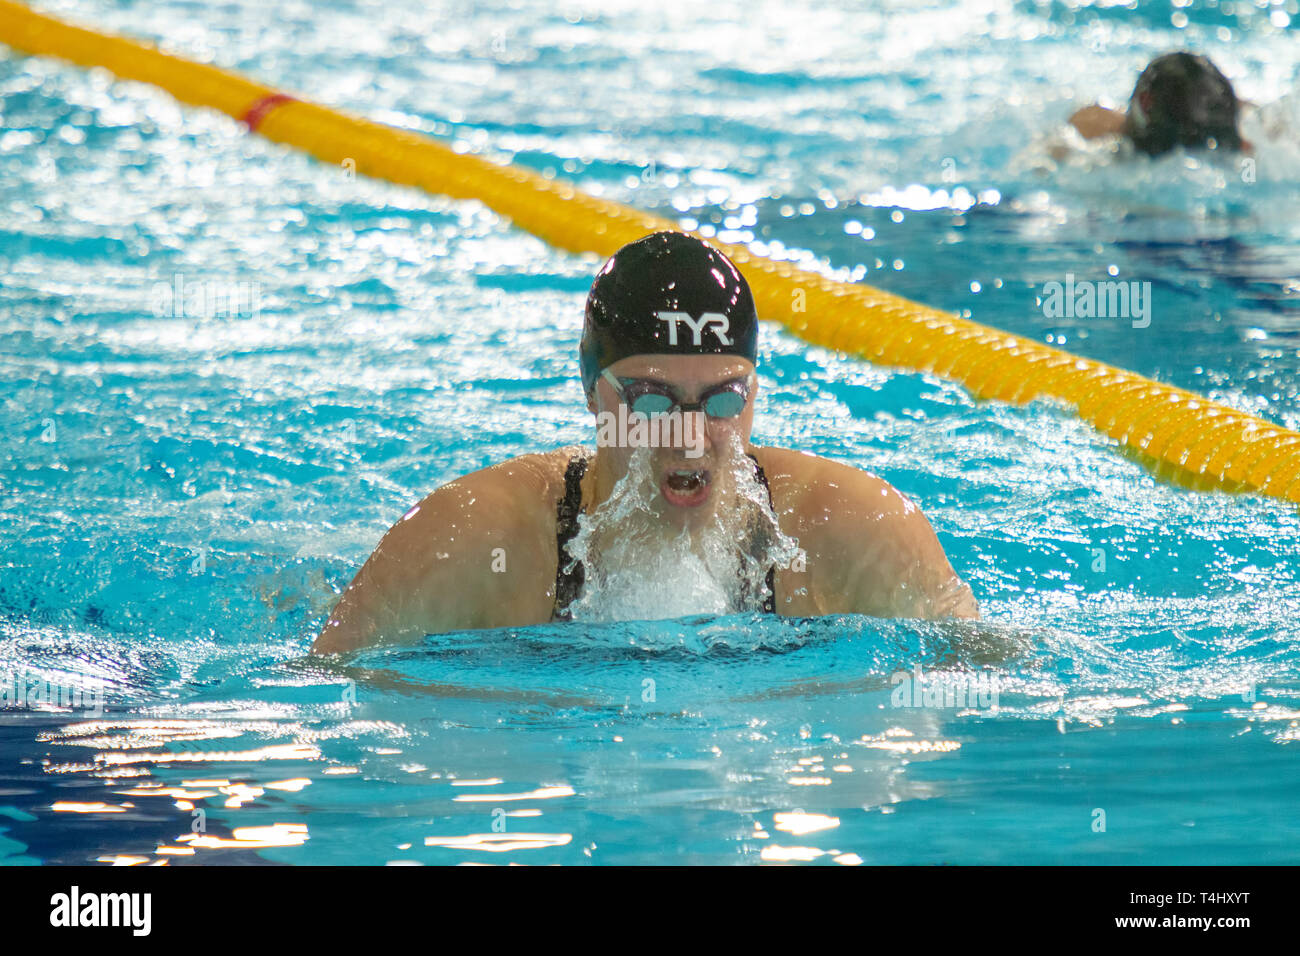 Aimee Willmott (University of Stirling) in action during the women's open 400 metres individual medley final, during Day 1 of the 2019 British Swimming Championships, at Tollcross International Swimming Centre. Stock Photo